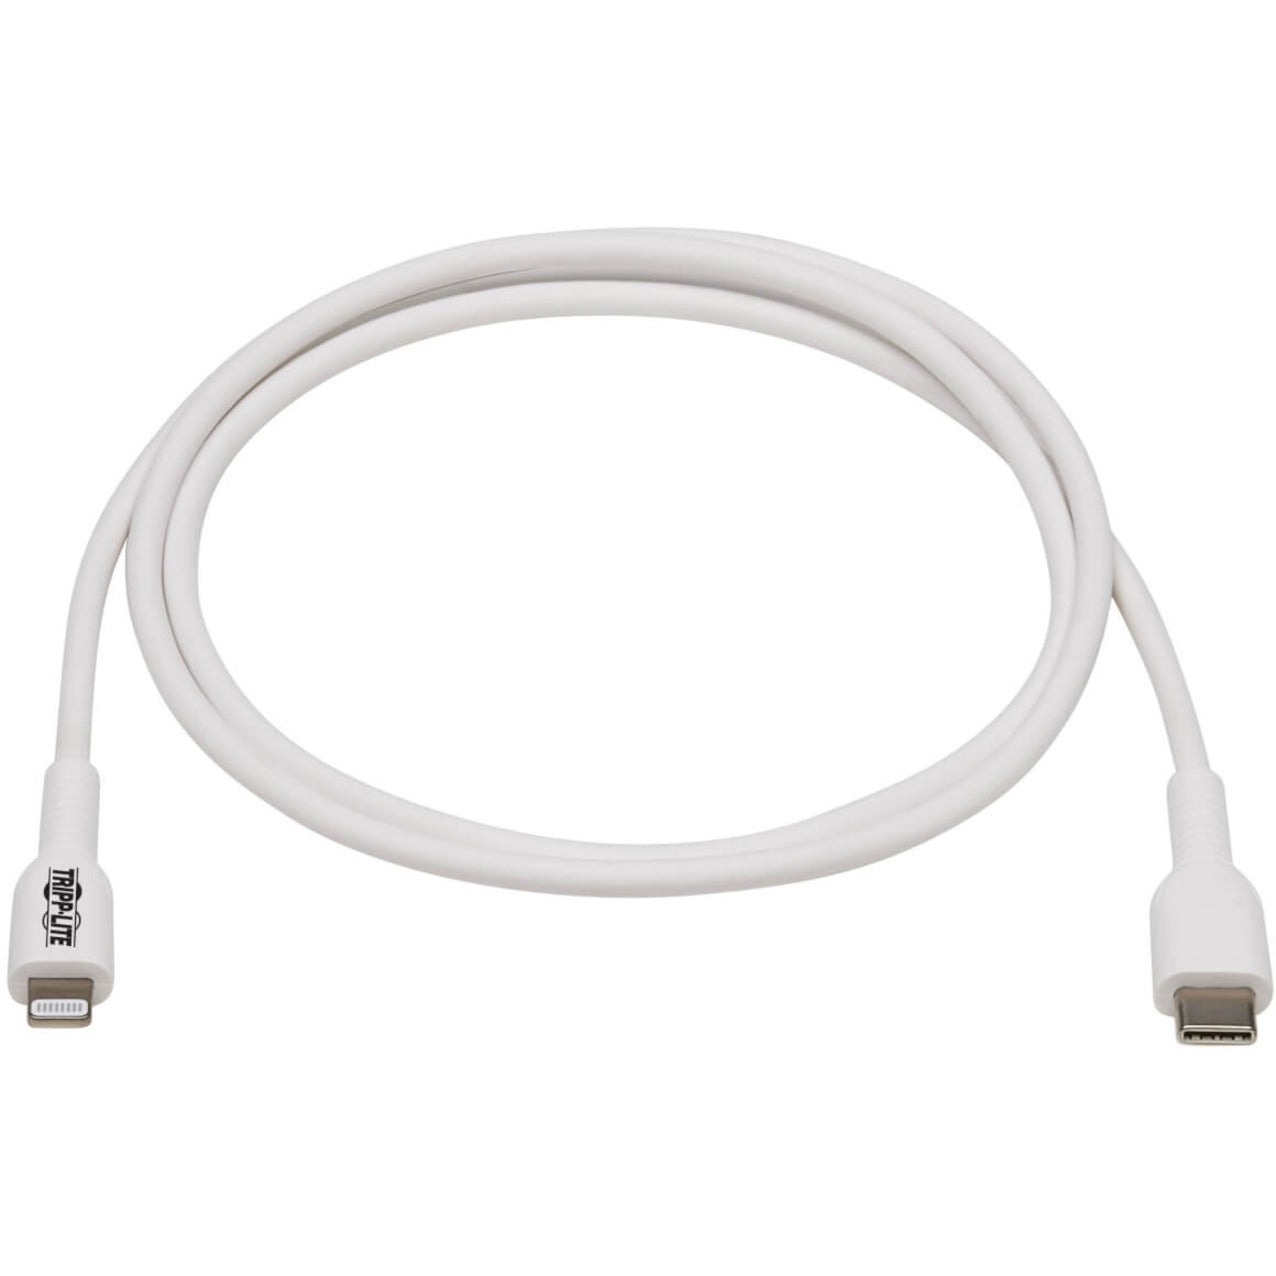 Tripp Lite M102-01M-WH USB-C to Lightning Sync/Charge Cable (M/M), MFi Certified, White, 1 m (3.3 ft.)